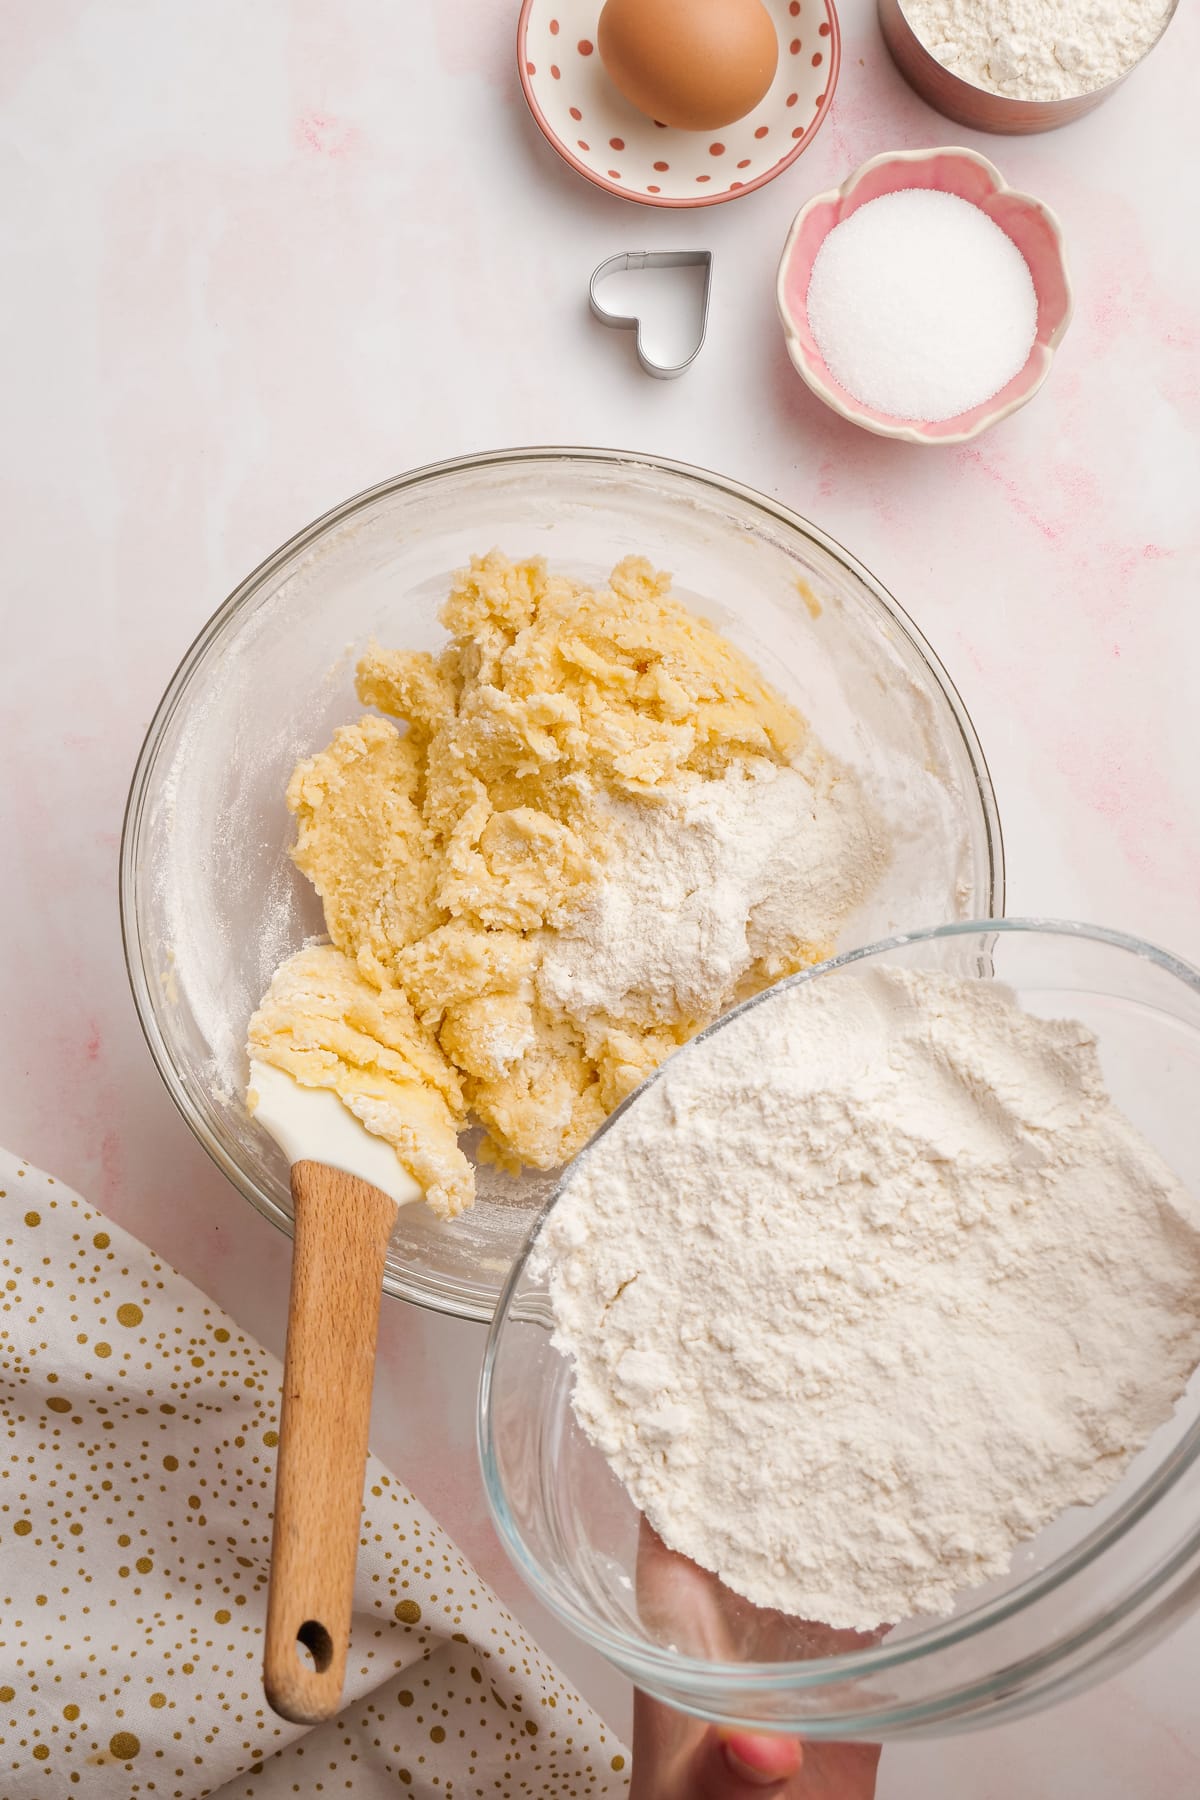 Combining dry ingredients with buttercream and sugar